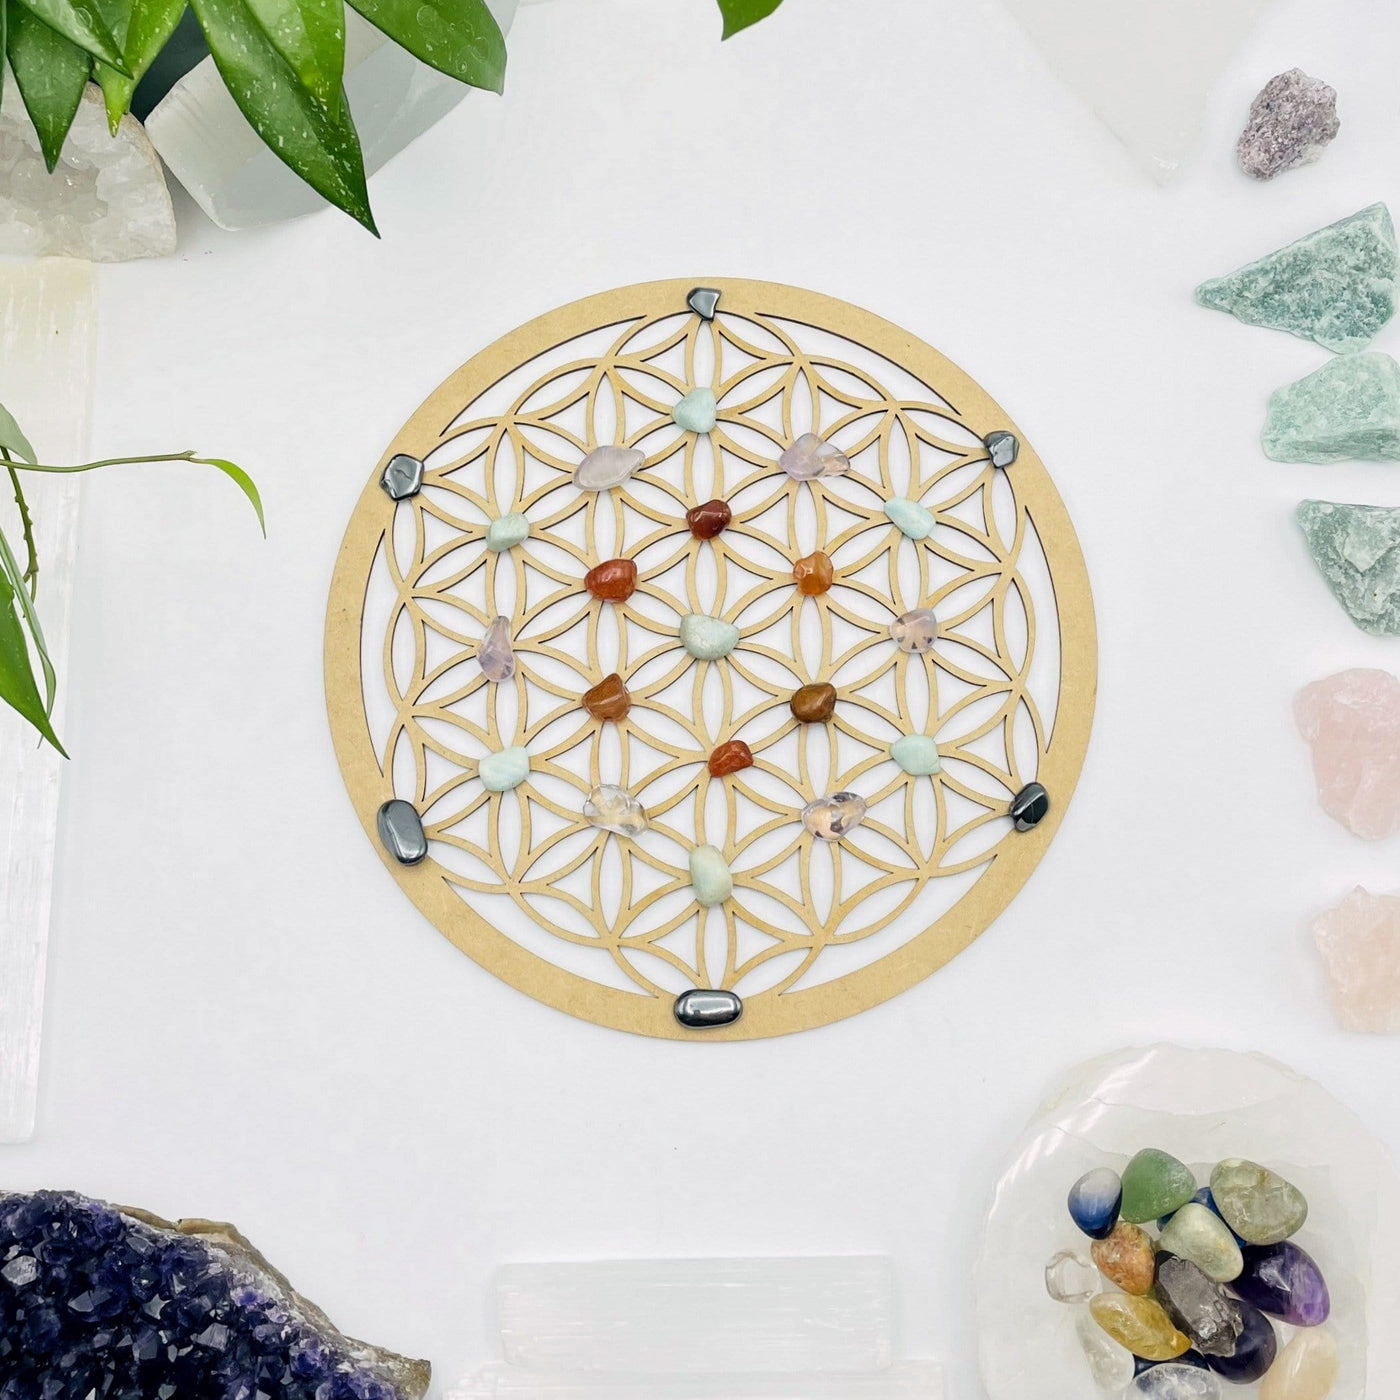 flower of life crystal grid with stones on top of it on white background with decorations